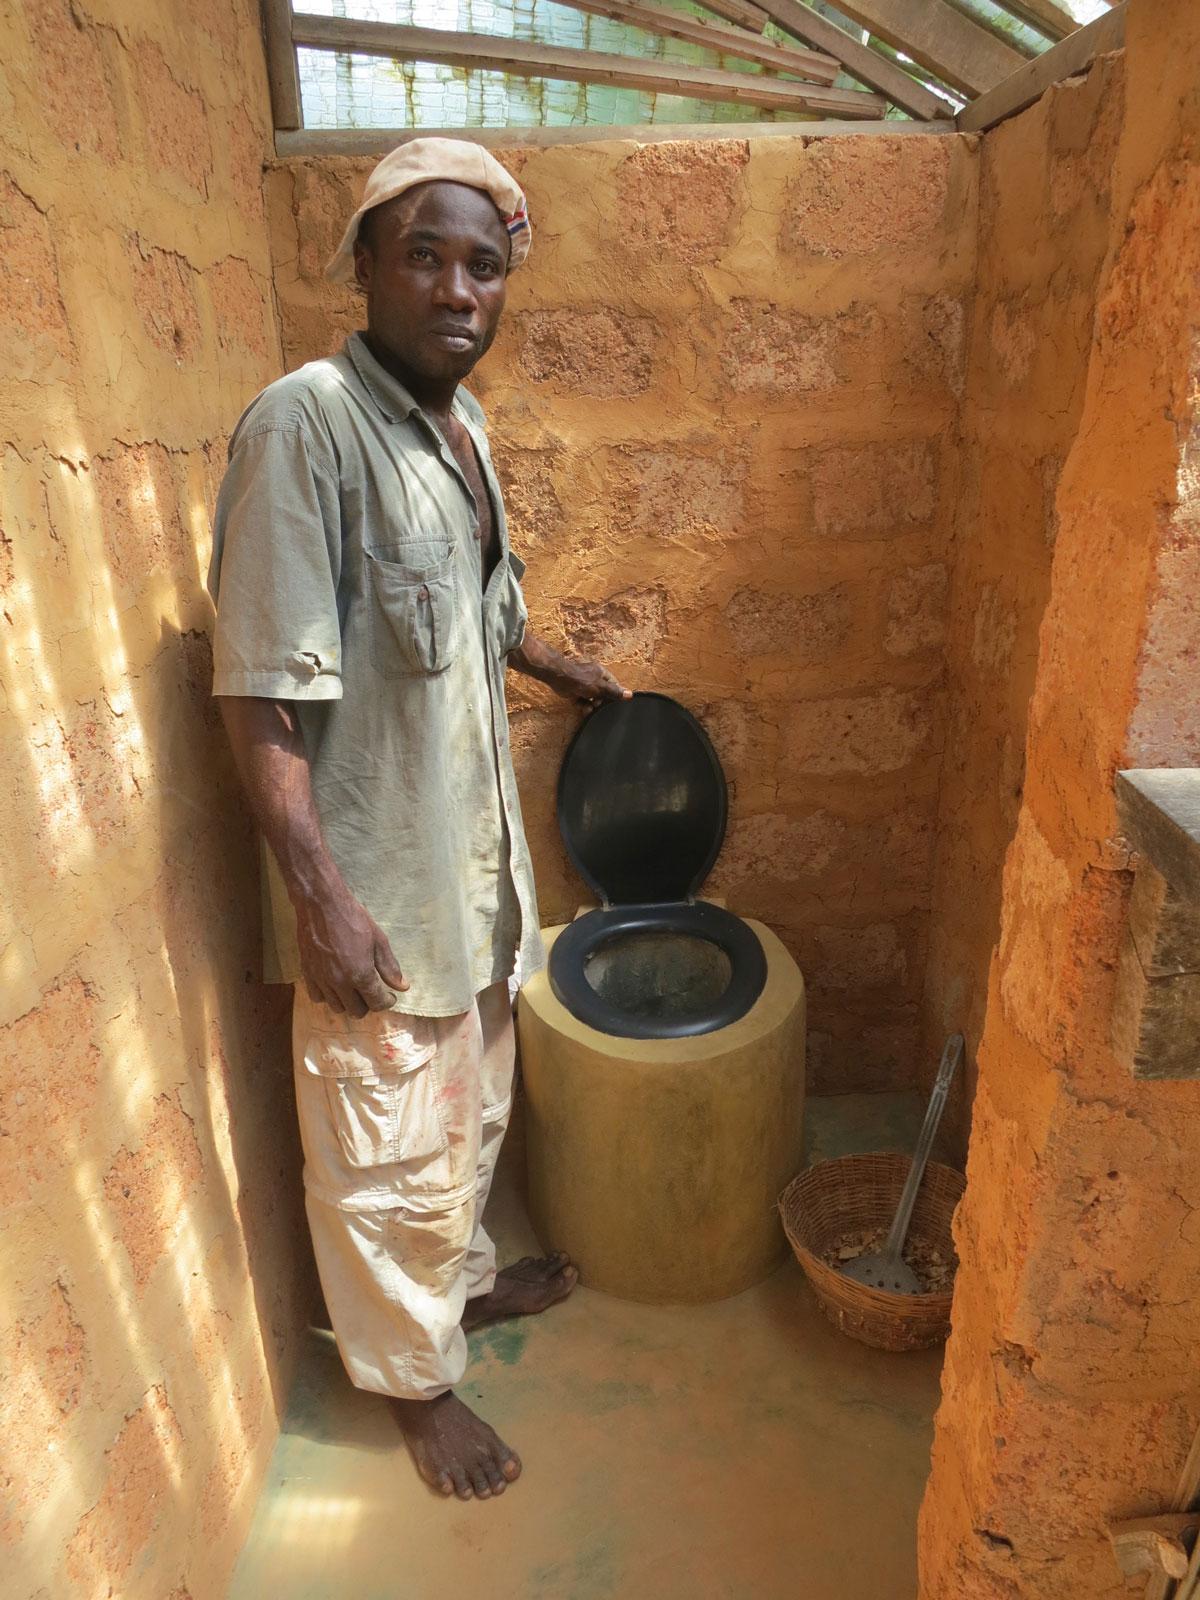 Composting toilet at Escape3points in Africa